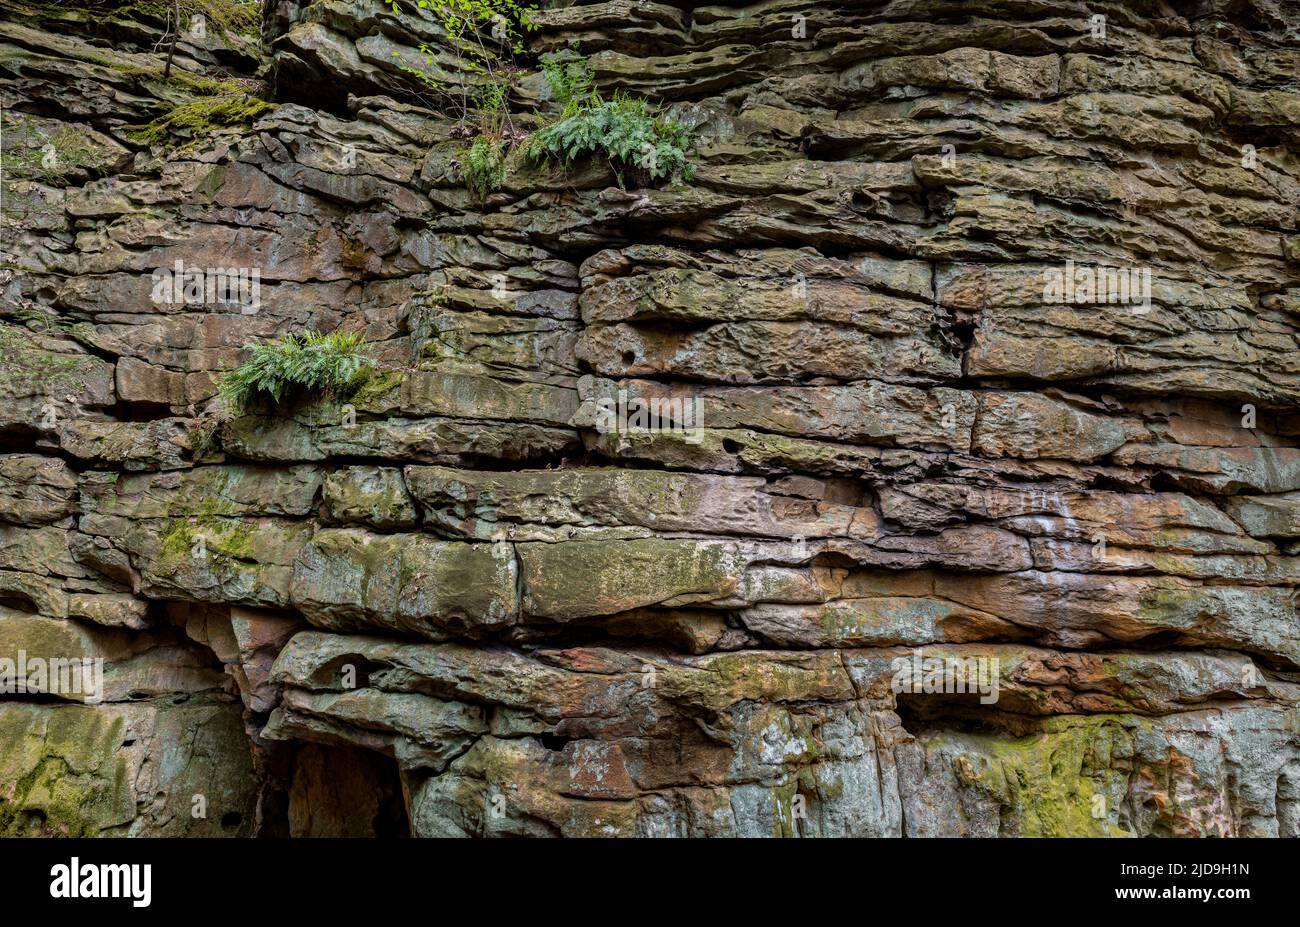 Layers of Droop sandstone with ferns, moss, and lichens growing on sheer cliff face in Beartown State Park in West Virginia. Stock Photo